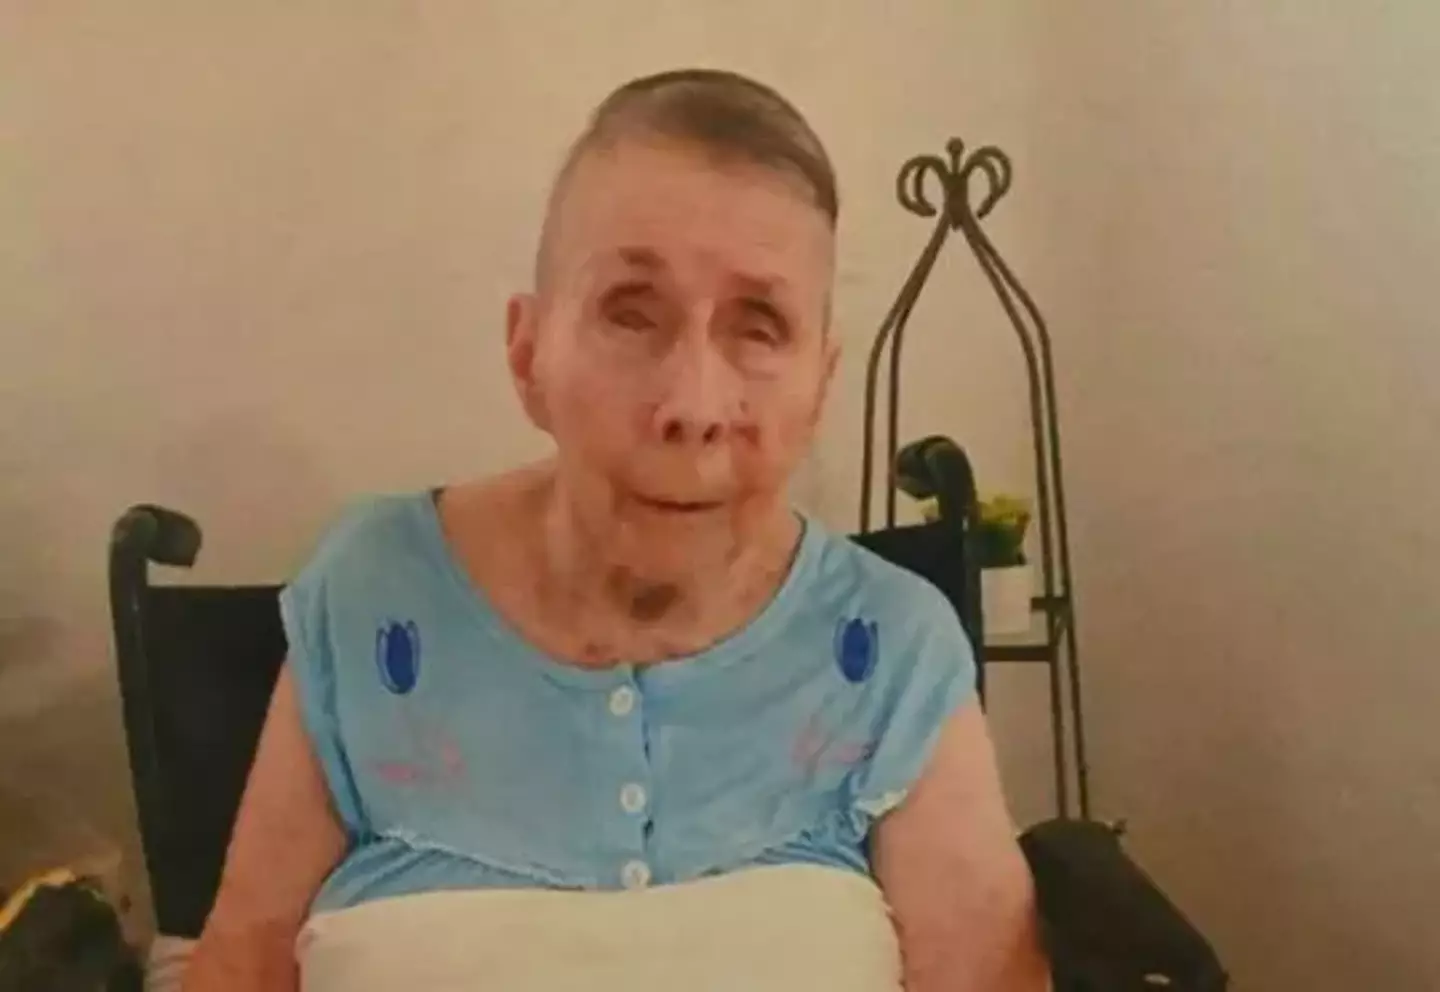 The 82-year-old was found Puerto Rico. (WPXI)